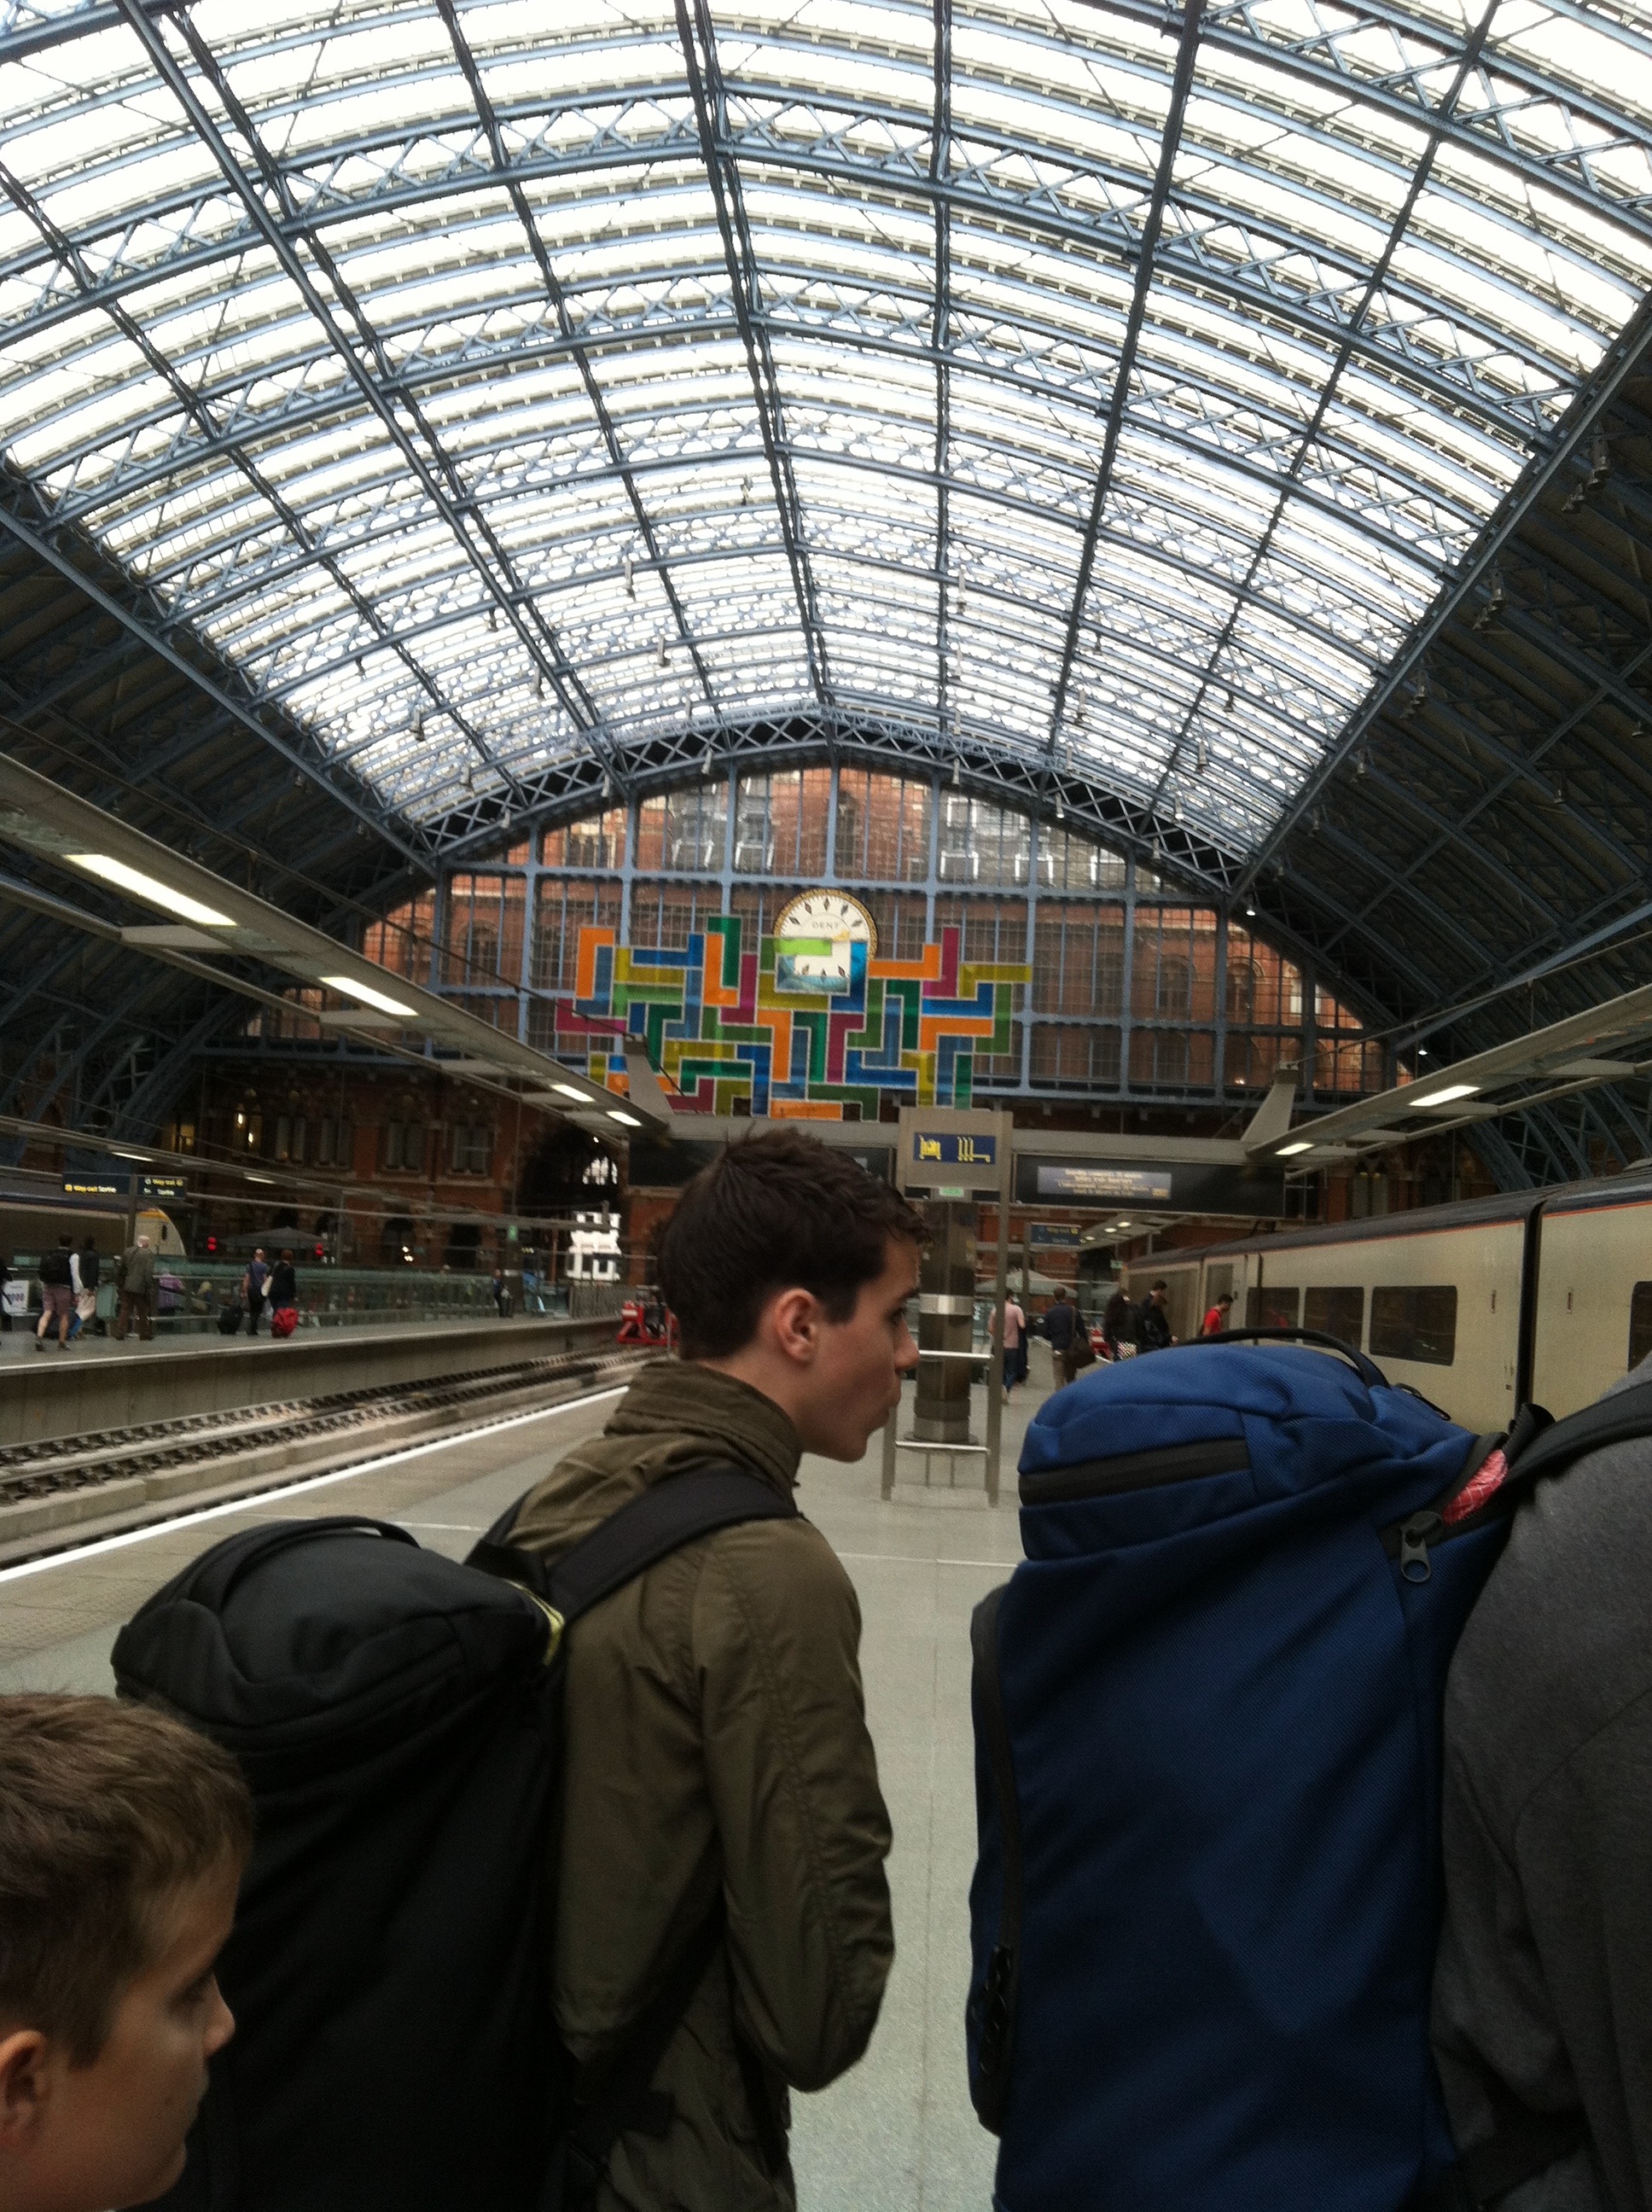 boys with backpacks boarding the Eurostar in Pancras station.